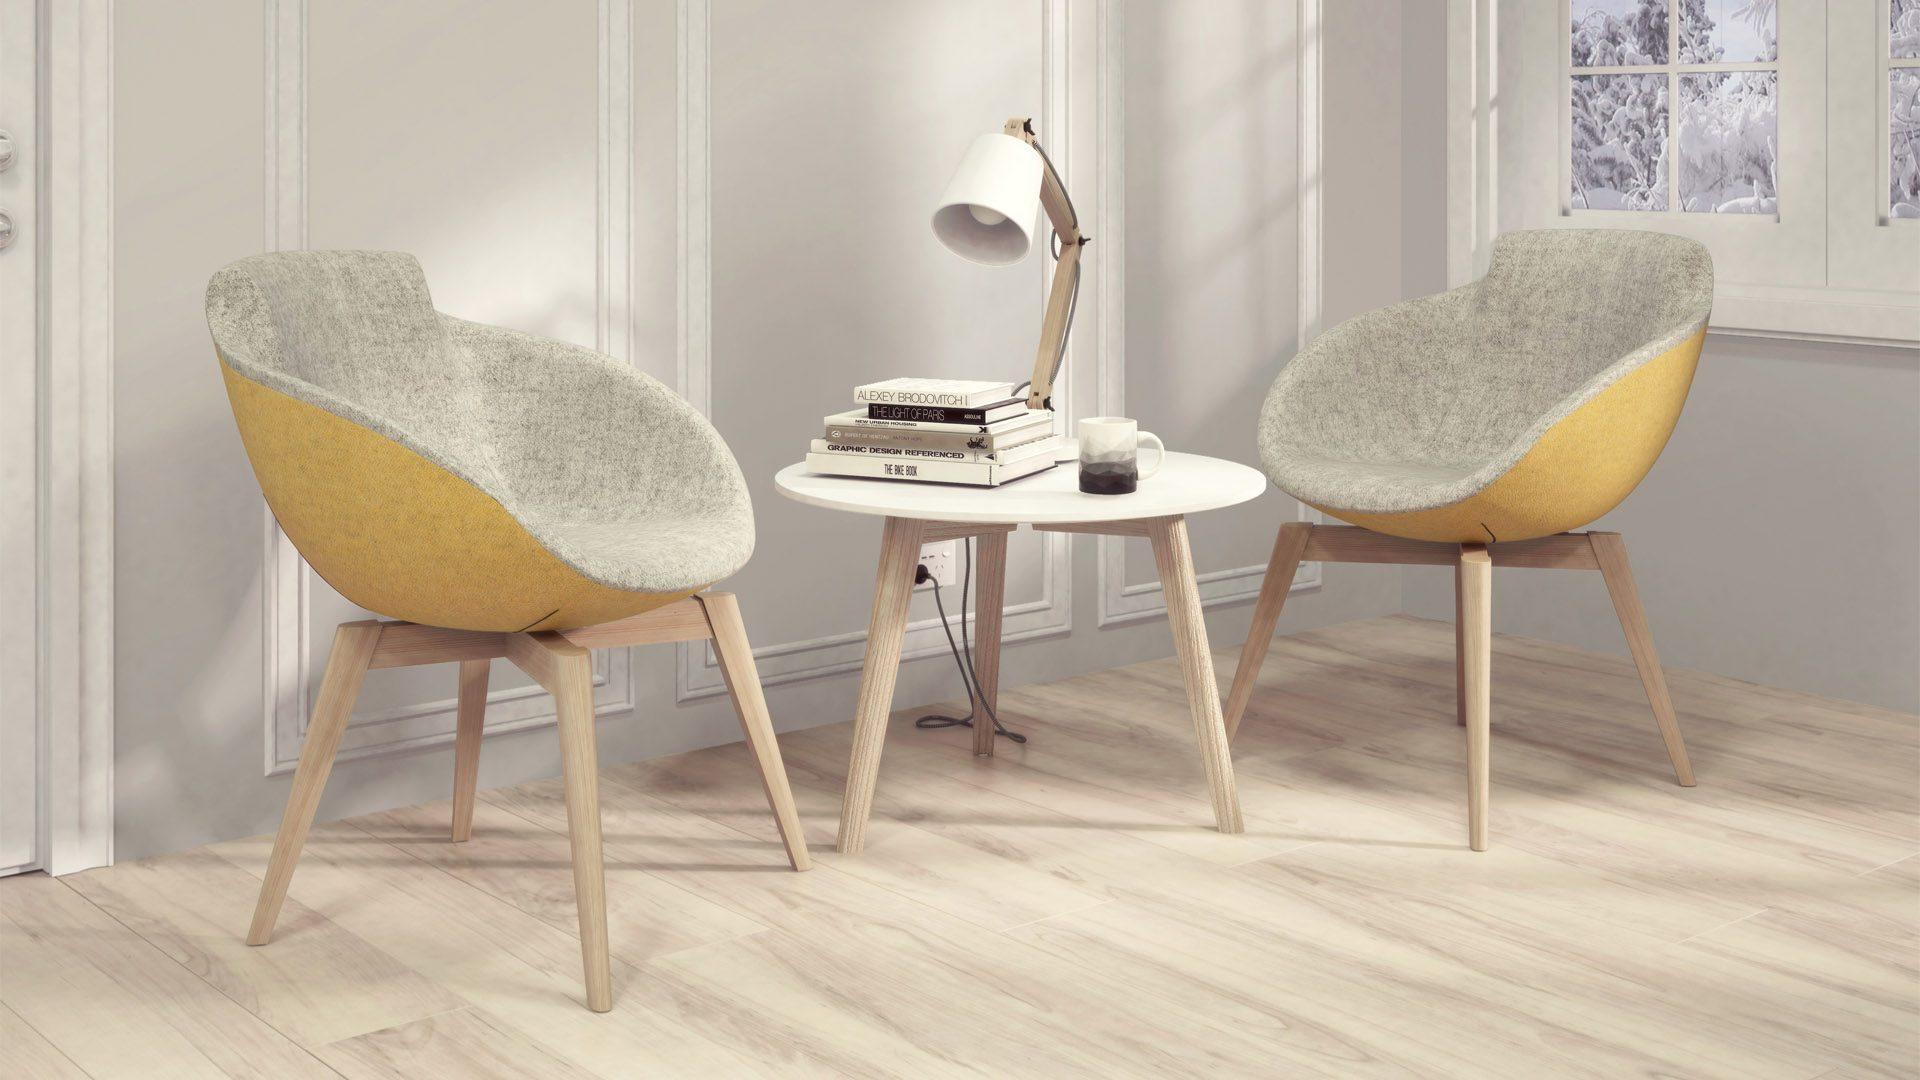 Stylish wooden coffee tables from the Nova Wood range match legs on Tula armchairs